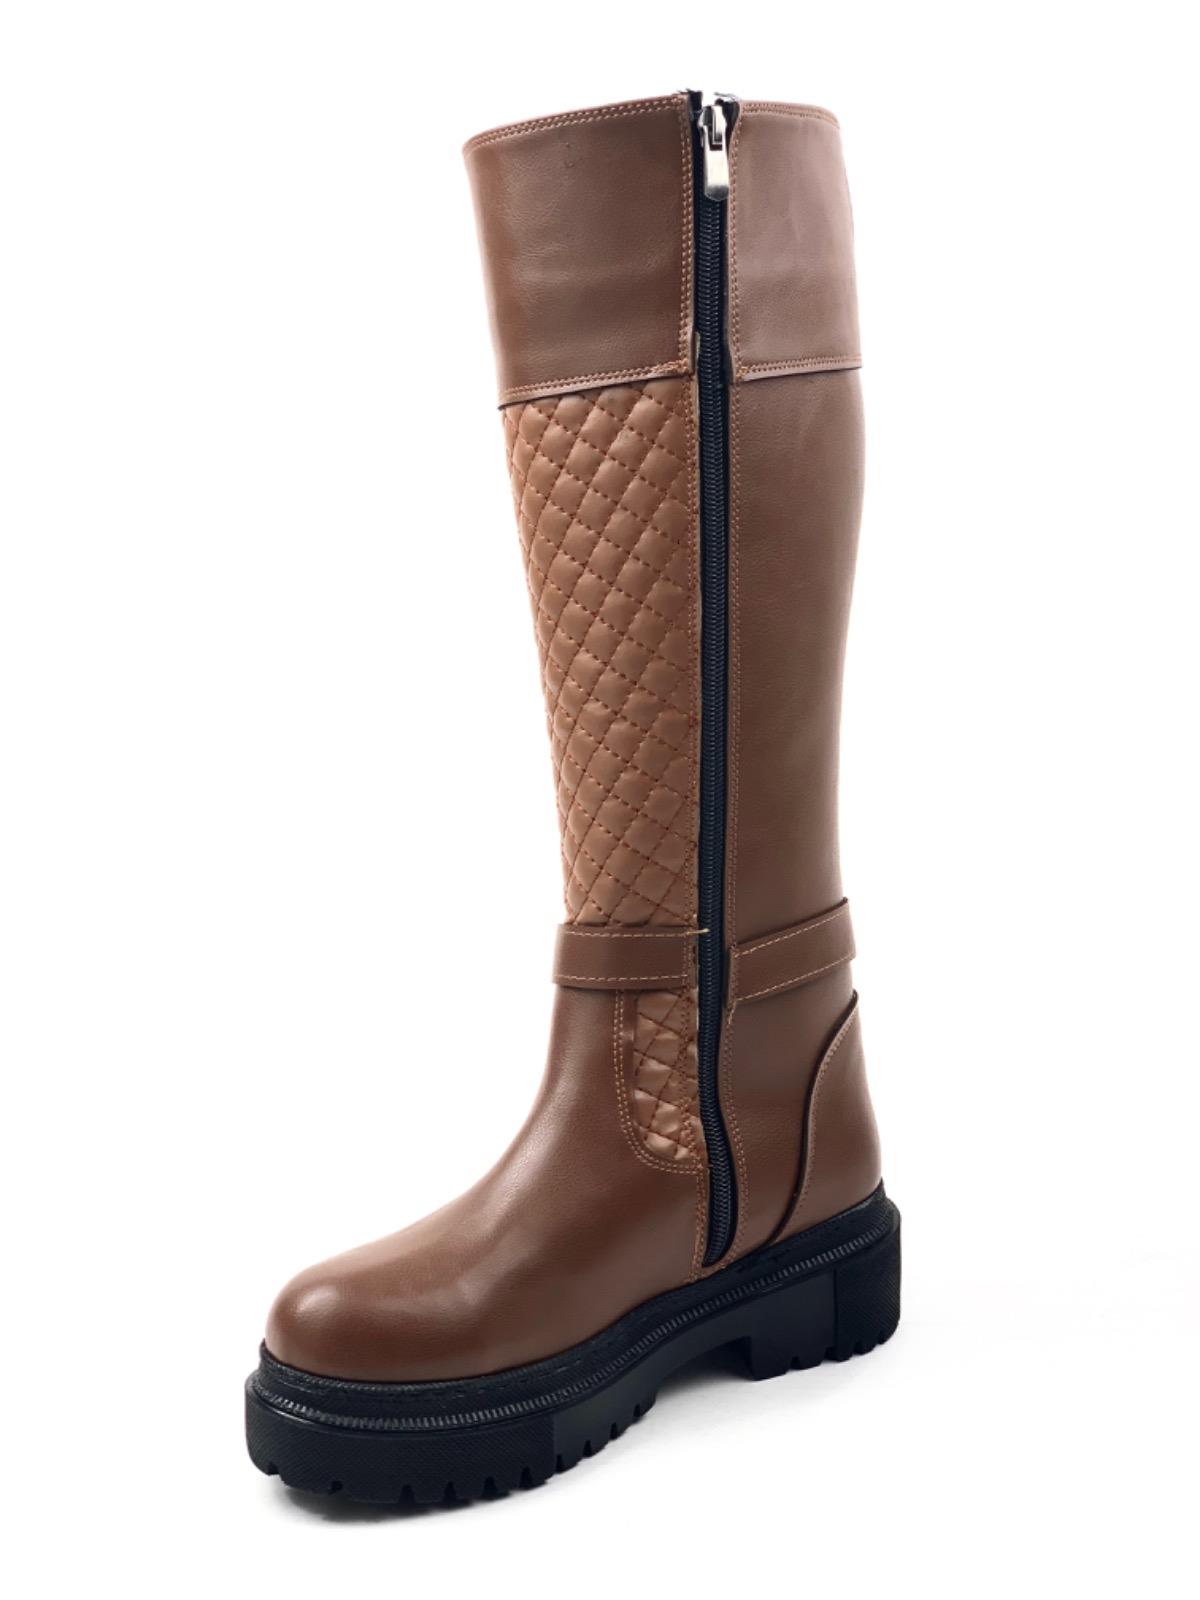 Women's Taba Jane Zippered Ready-made Thermo Sole Knee-high Patterned Buckle Boots - STREETMODE™